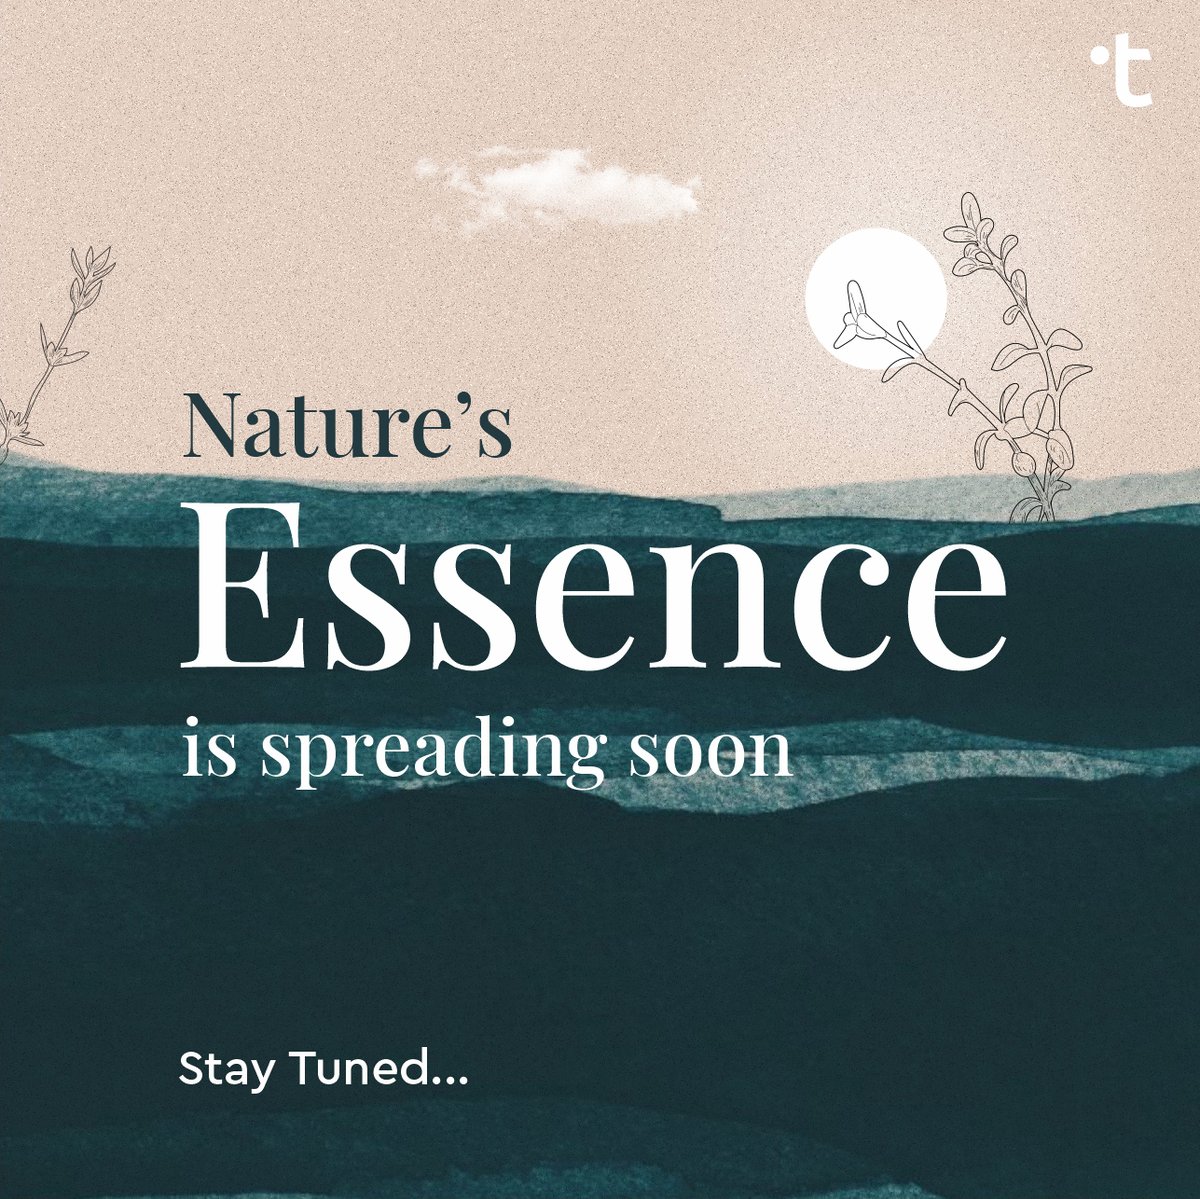 We are bringing nature's essence for you in its purest form. Stay tuned to know more.
#twasa #cosmetics #twasacosmetics #redefiningselfcare #selfcareclub #handmadesoap #brightskin #HappySkin #SkinLove #ParabenFree #suppleskin #softskin #SkinGoals #nature #essence #comingsoon